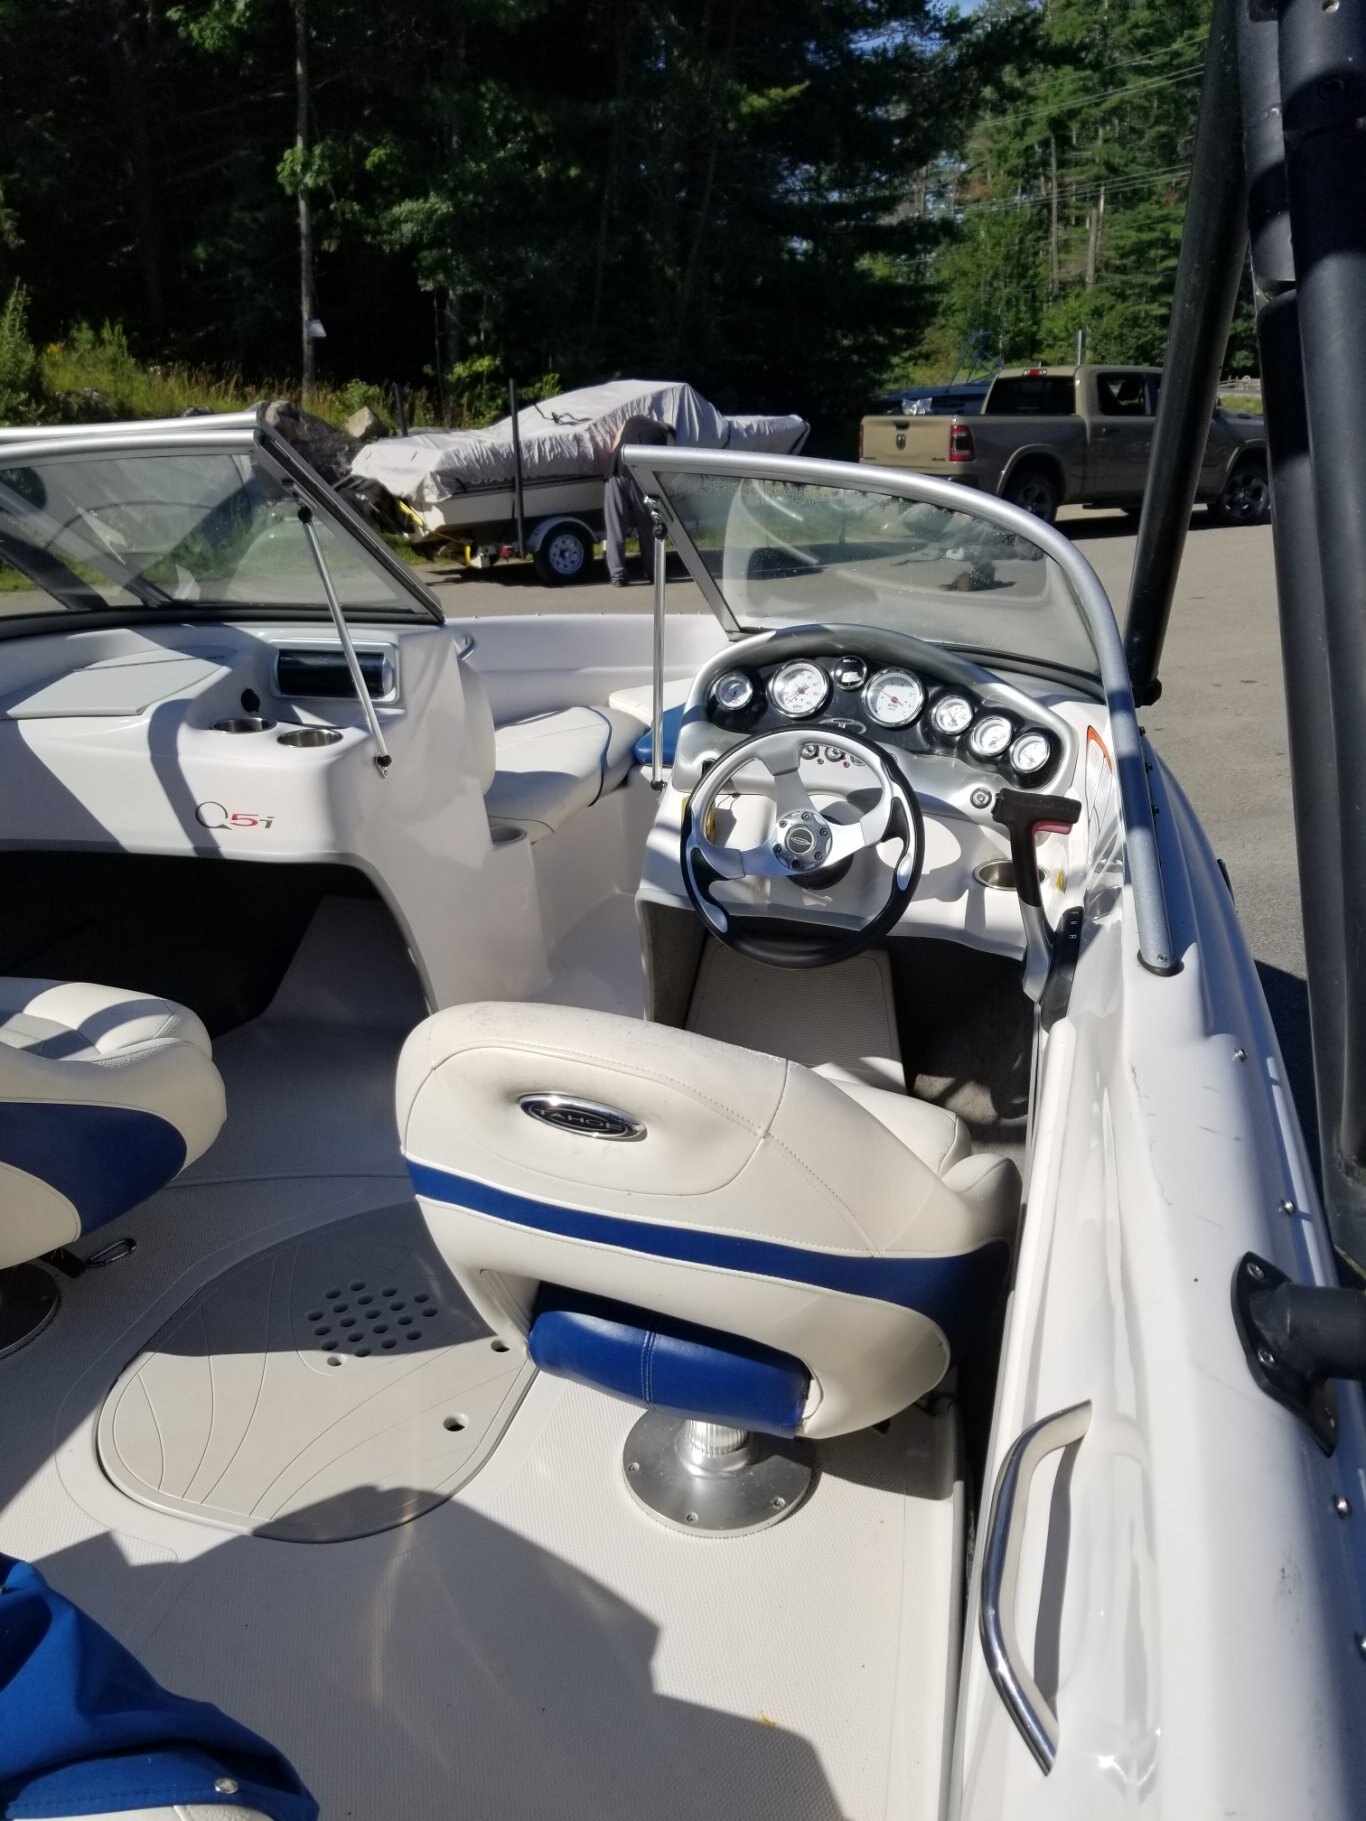 TAHOE WITH MERCRUISER V6 AND ALPHA ONE DRIVE